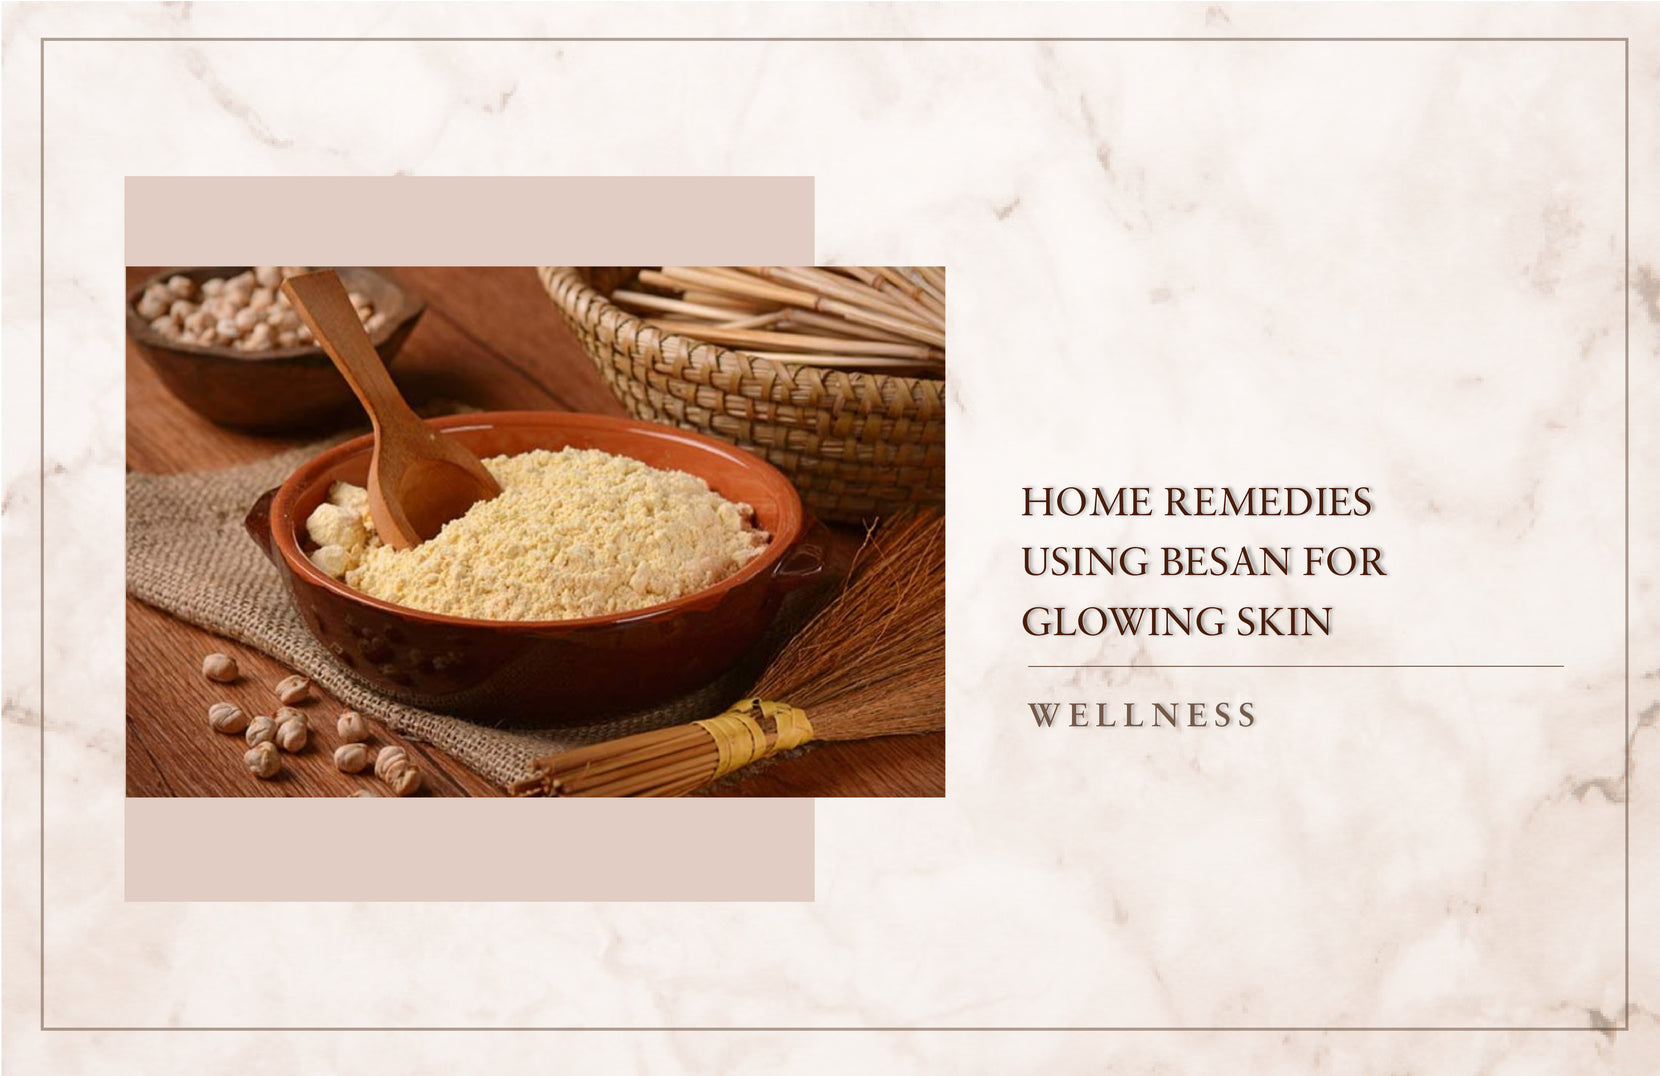 Home Remedies Using Besan For Glowing Skin